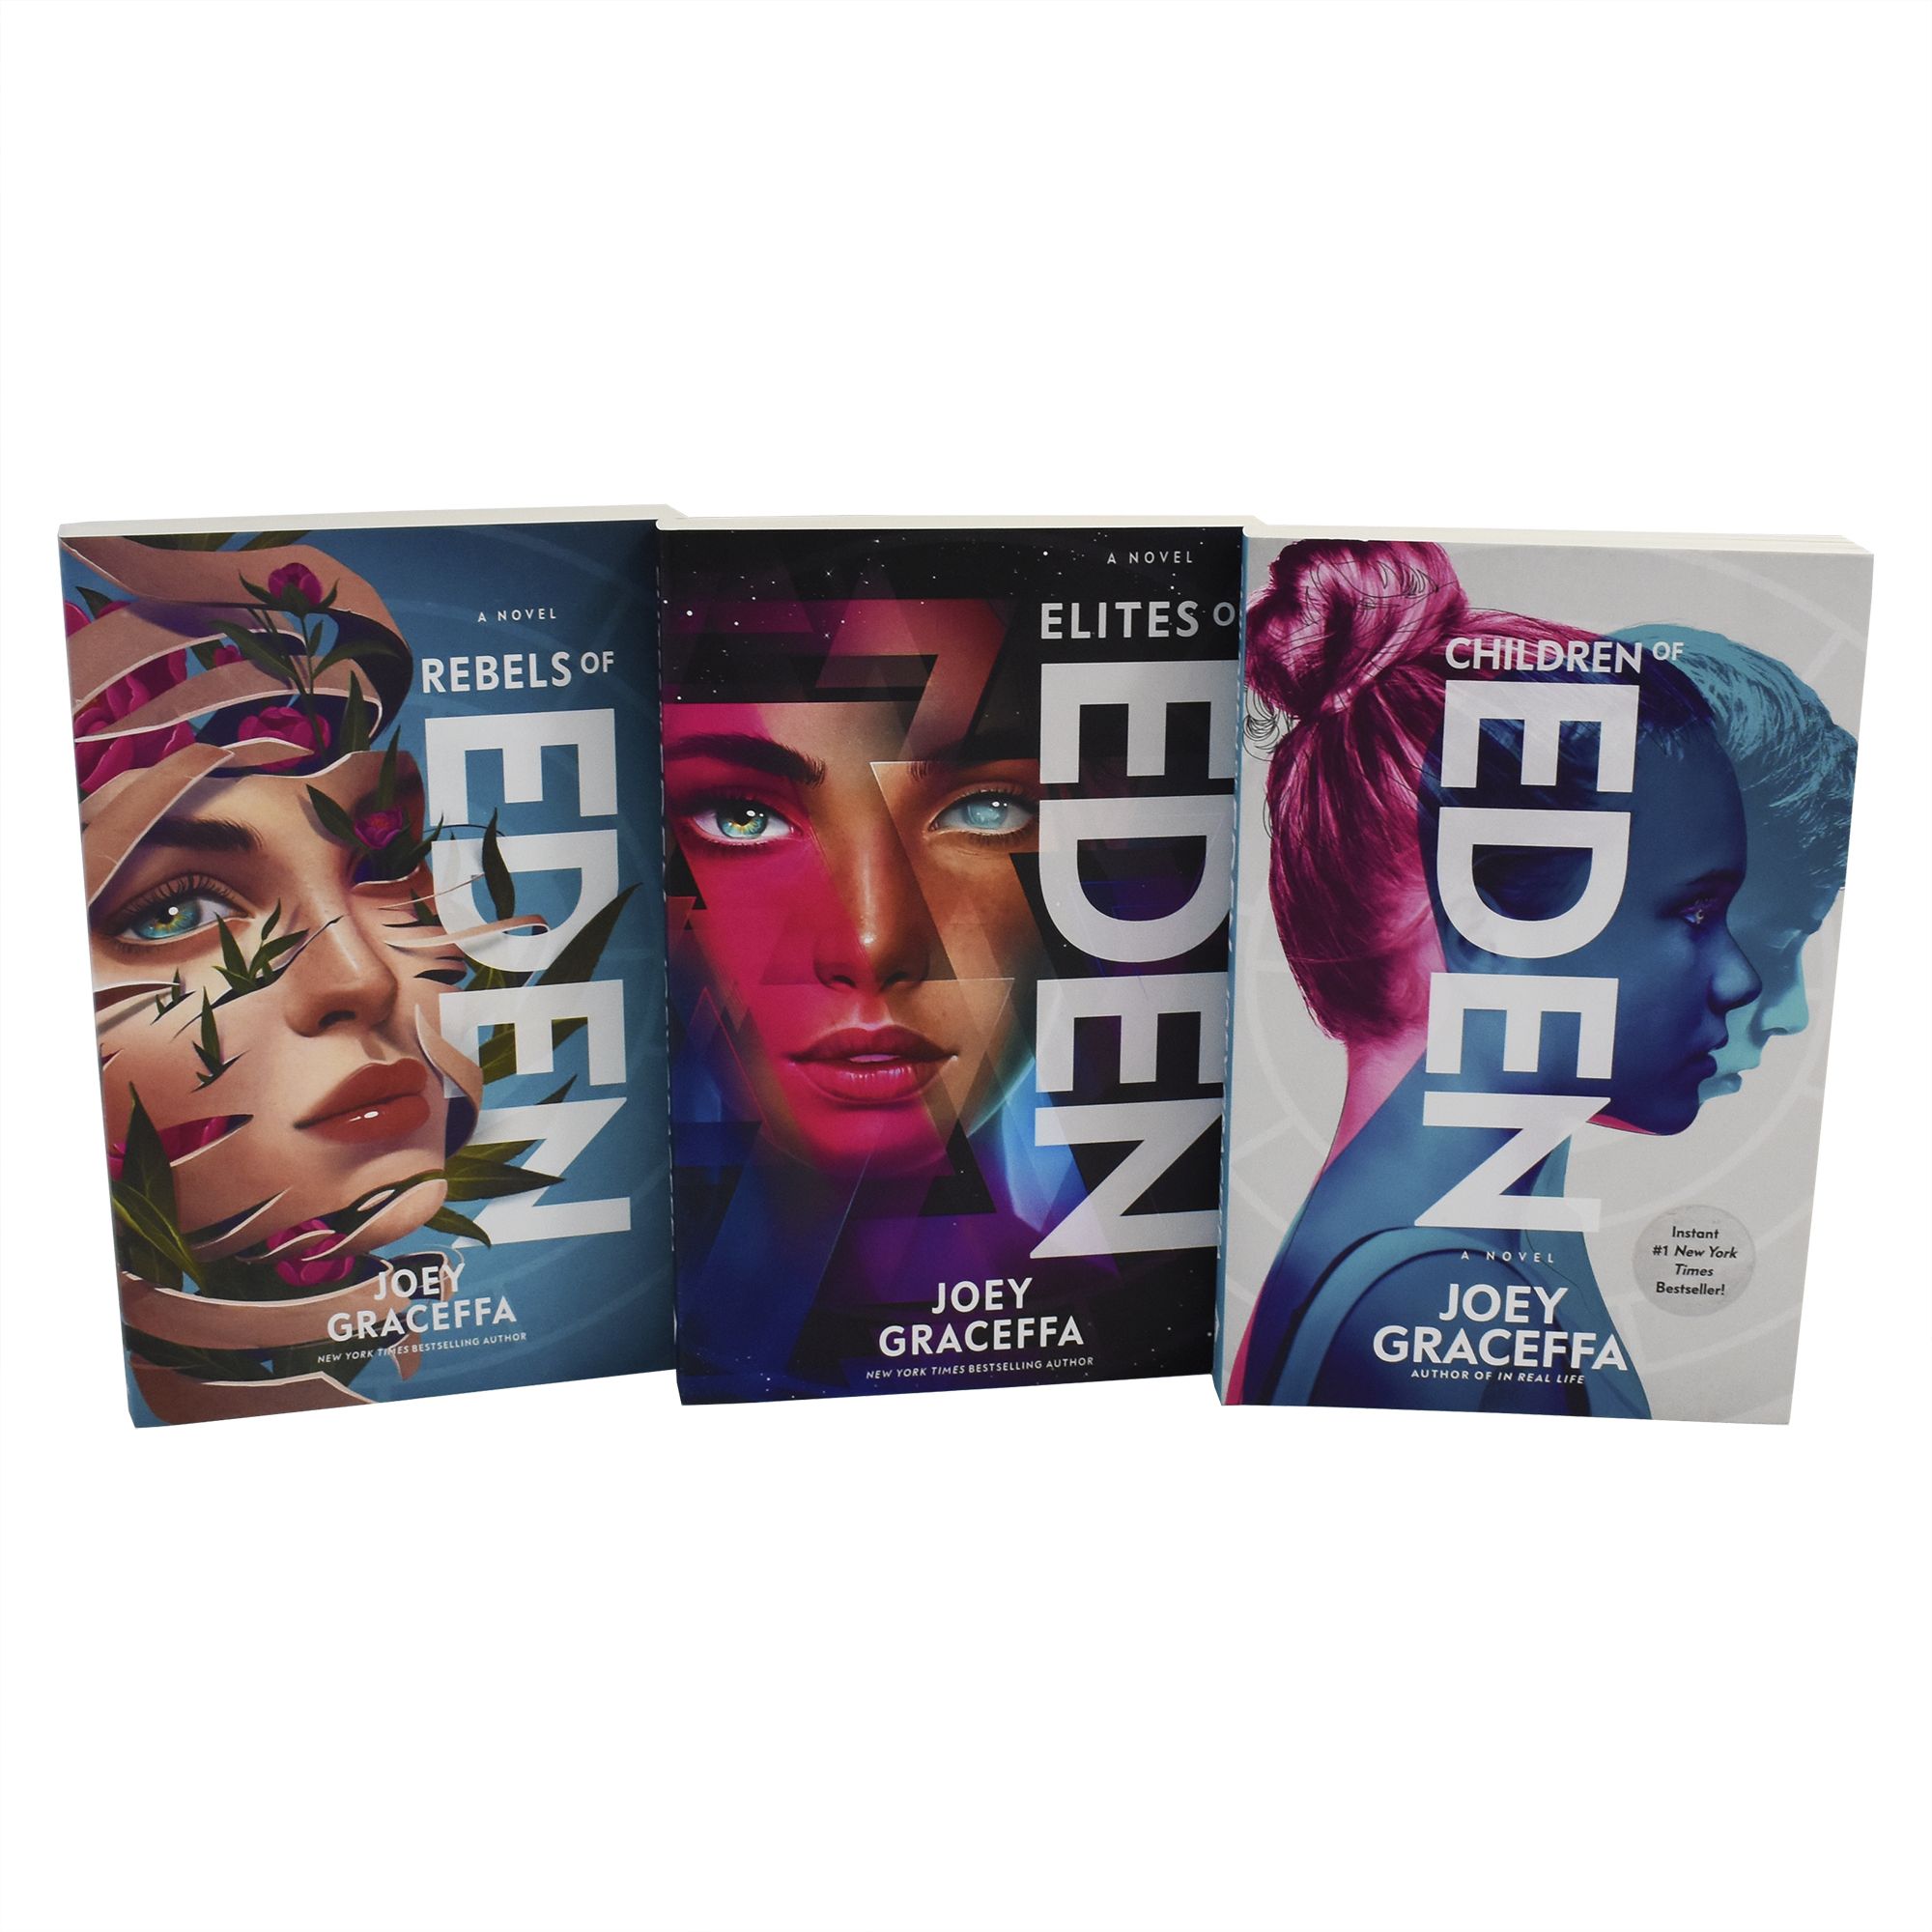 Children Of Eden Trilogy 3 Books Adult Collection Paperback By Joey Graceffa - St Stephens Books